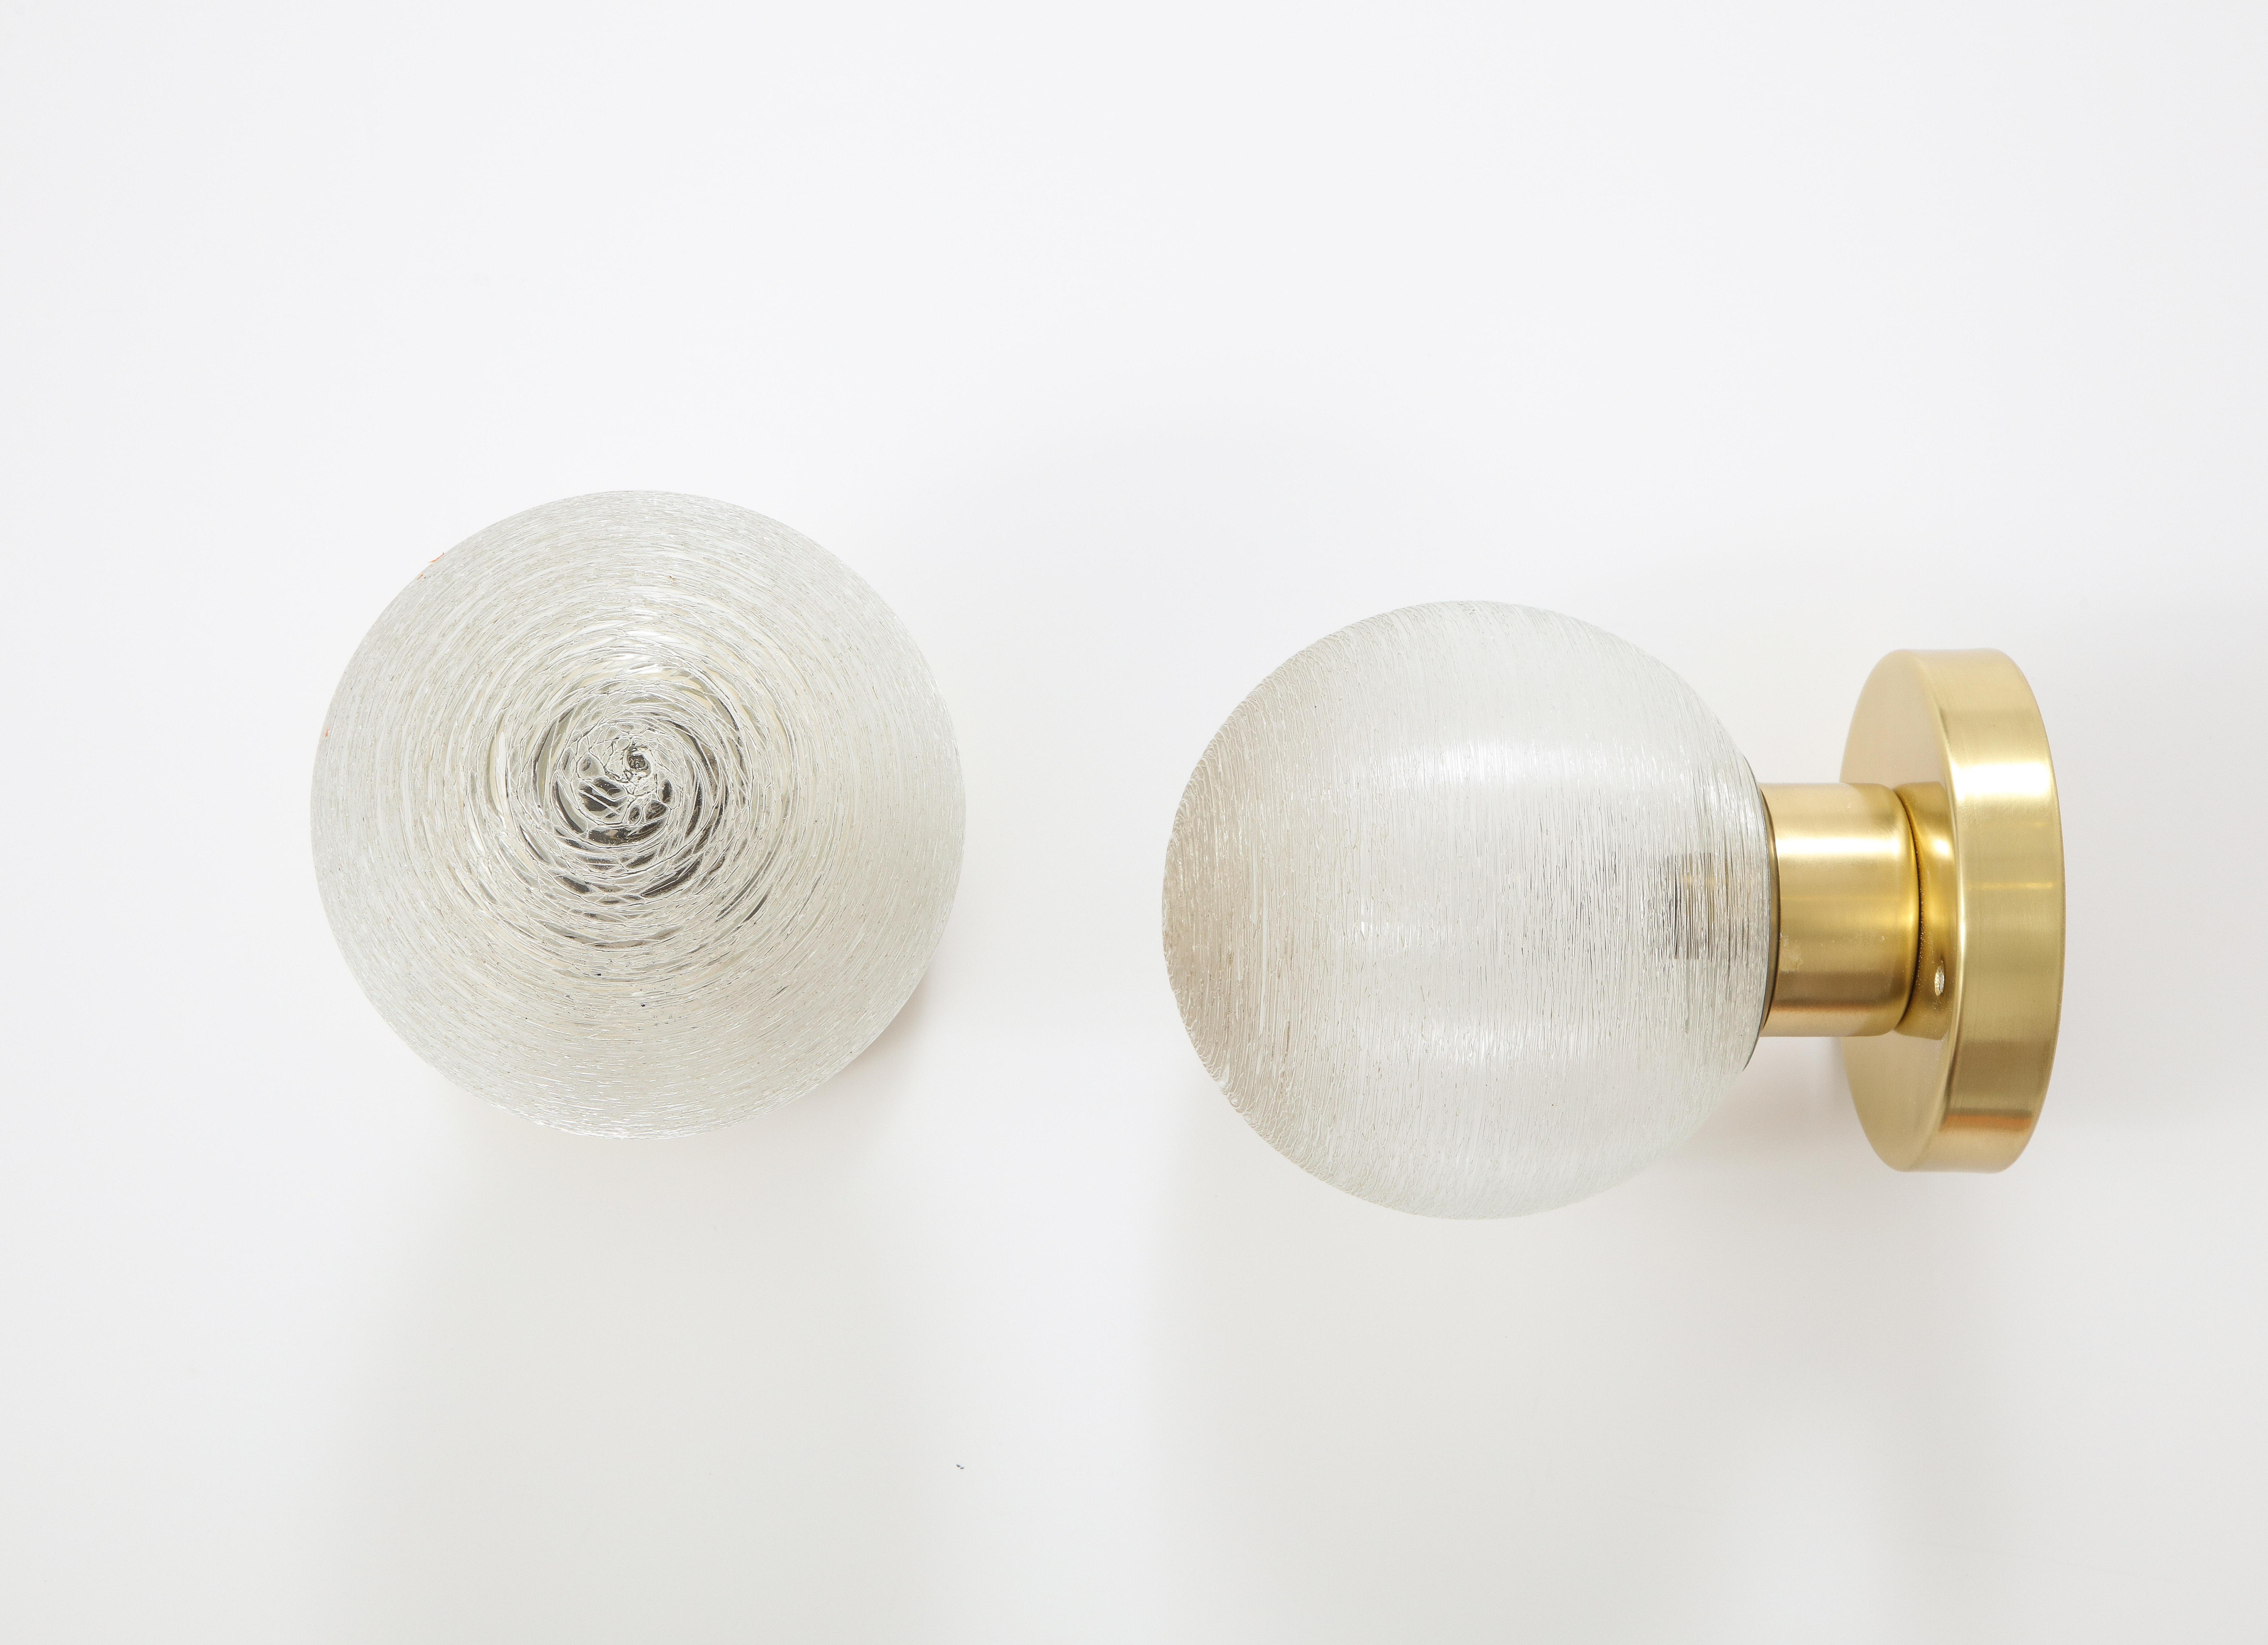 Pair of Spun Glass Sconces by Doria In Good Condition For Sale In New York, NY